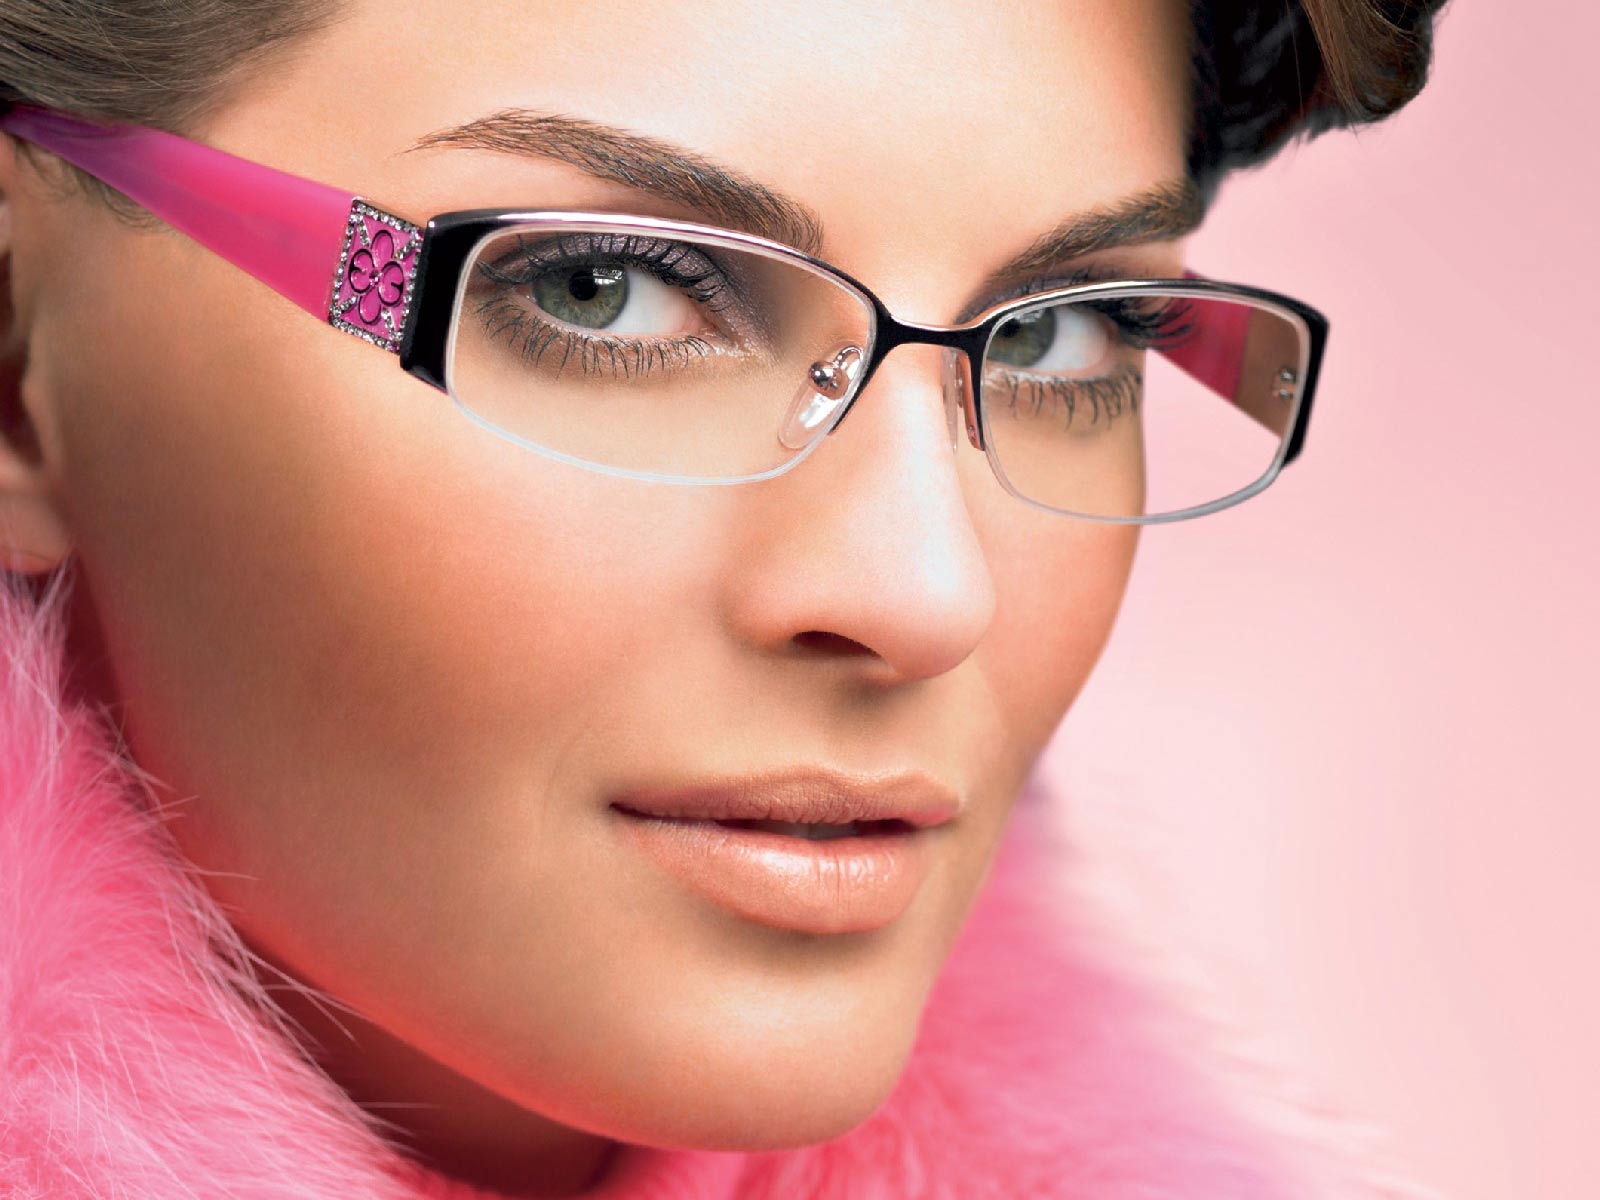 Cool Eyeglasses for Woman New Fashion Arrivals/Styles